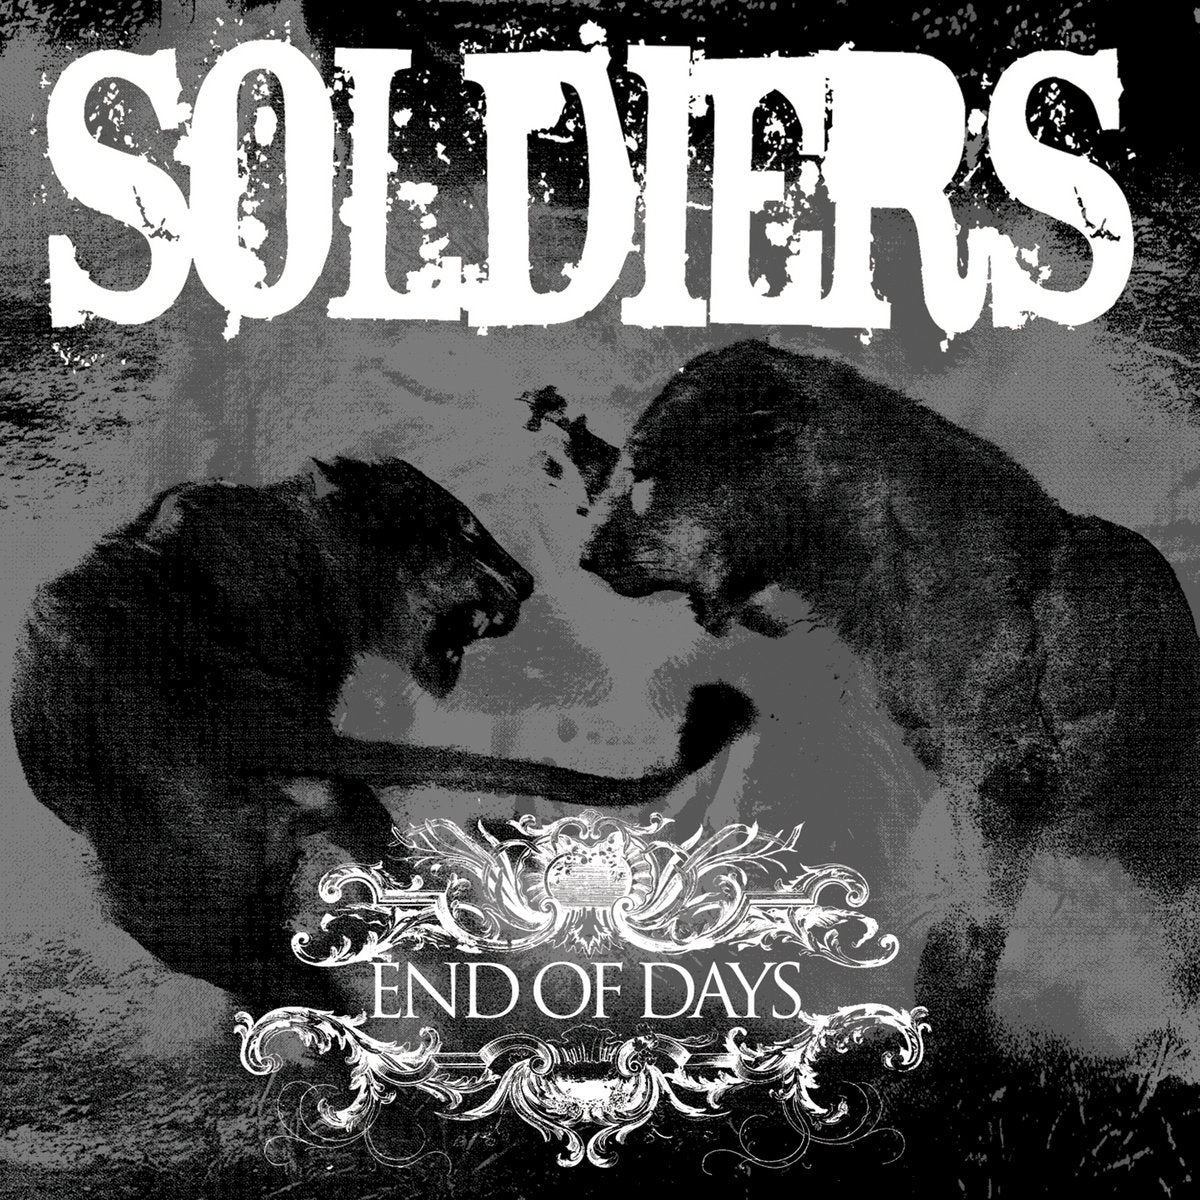 Soliders "End of Days" CD